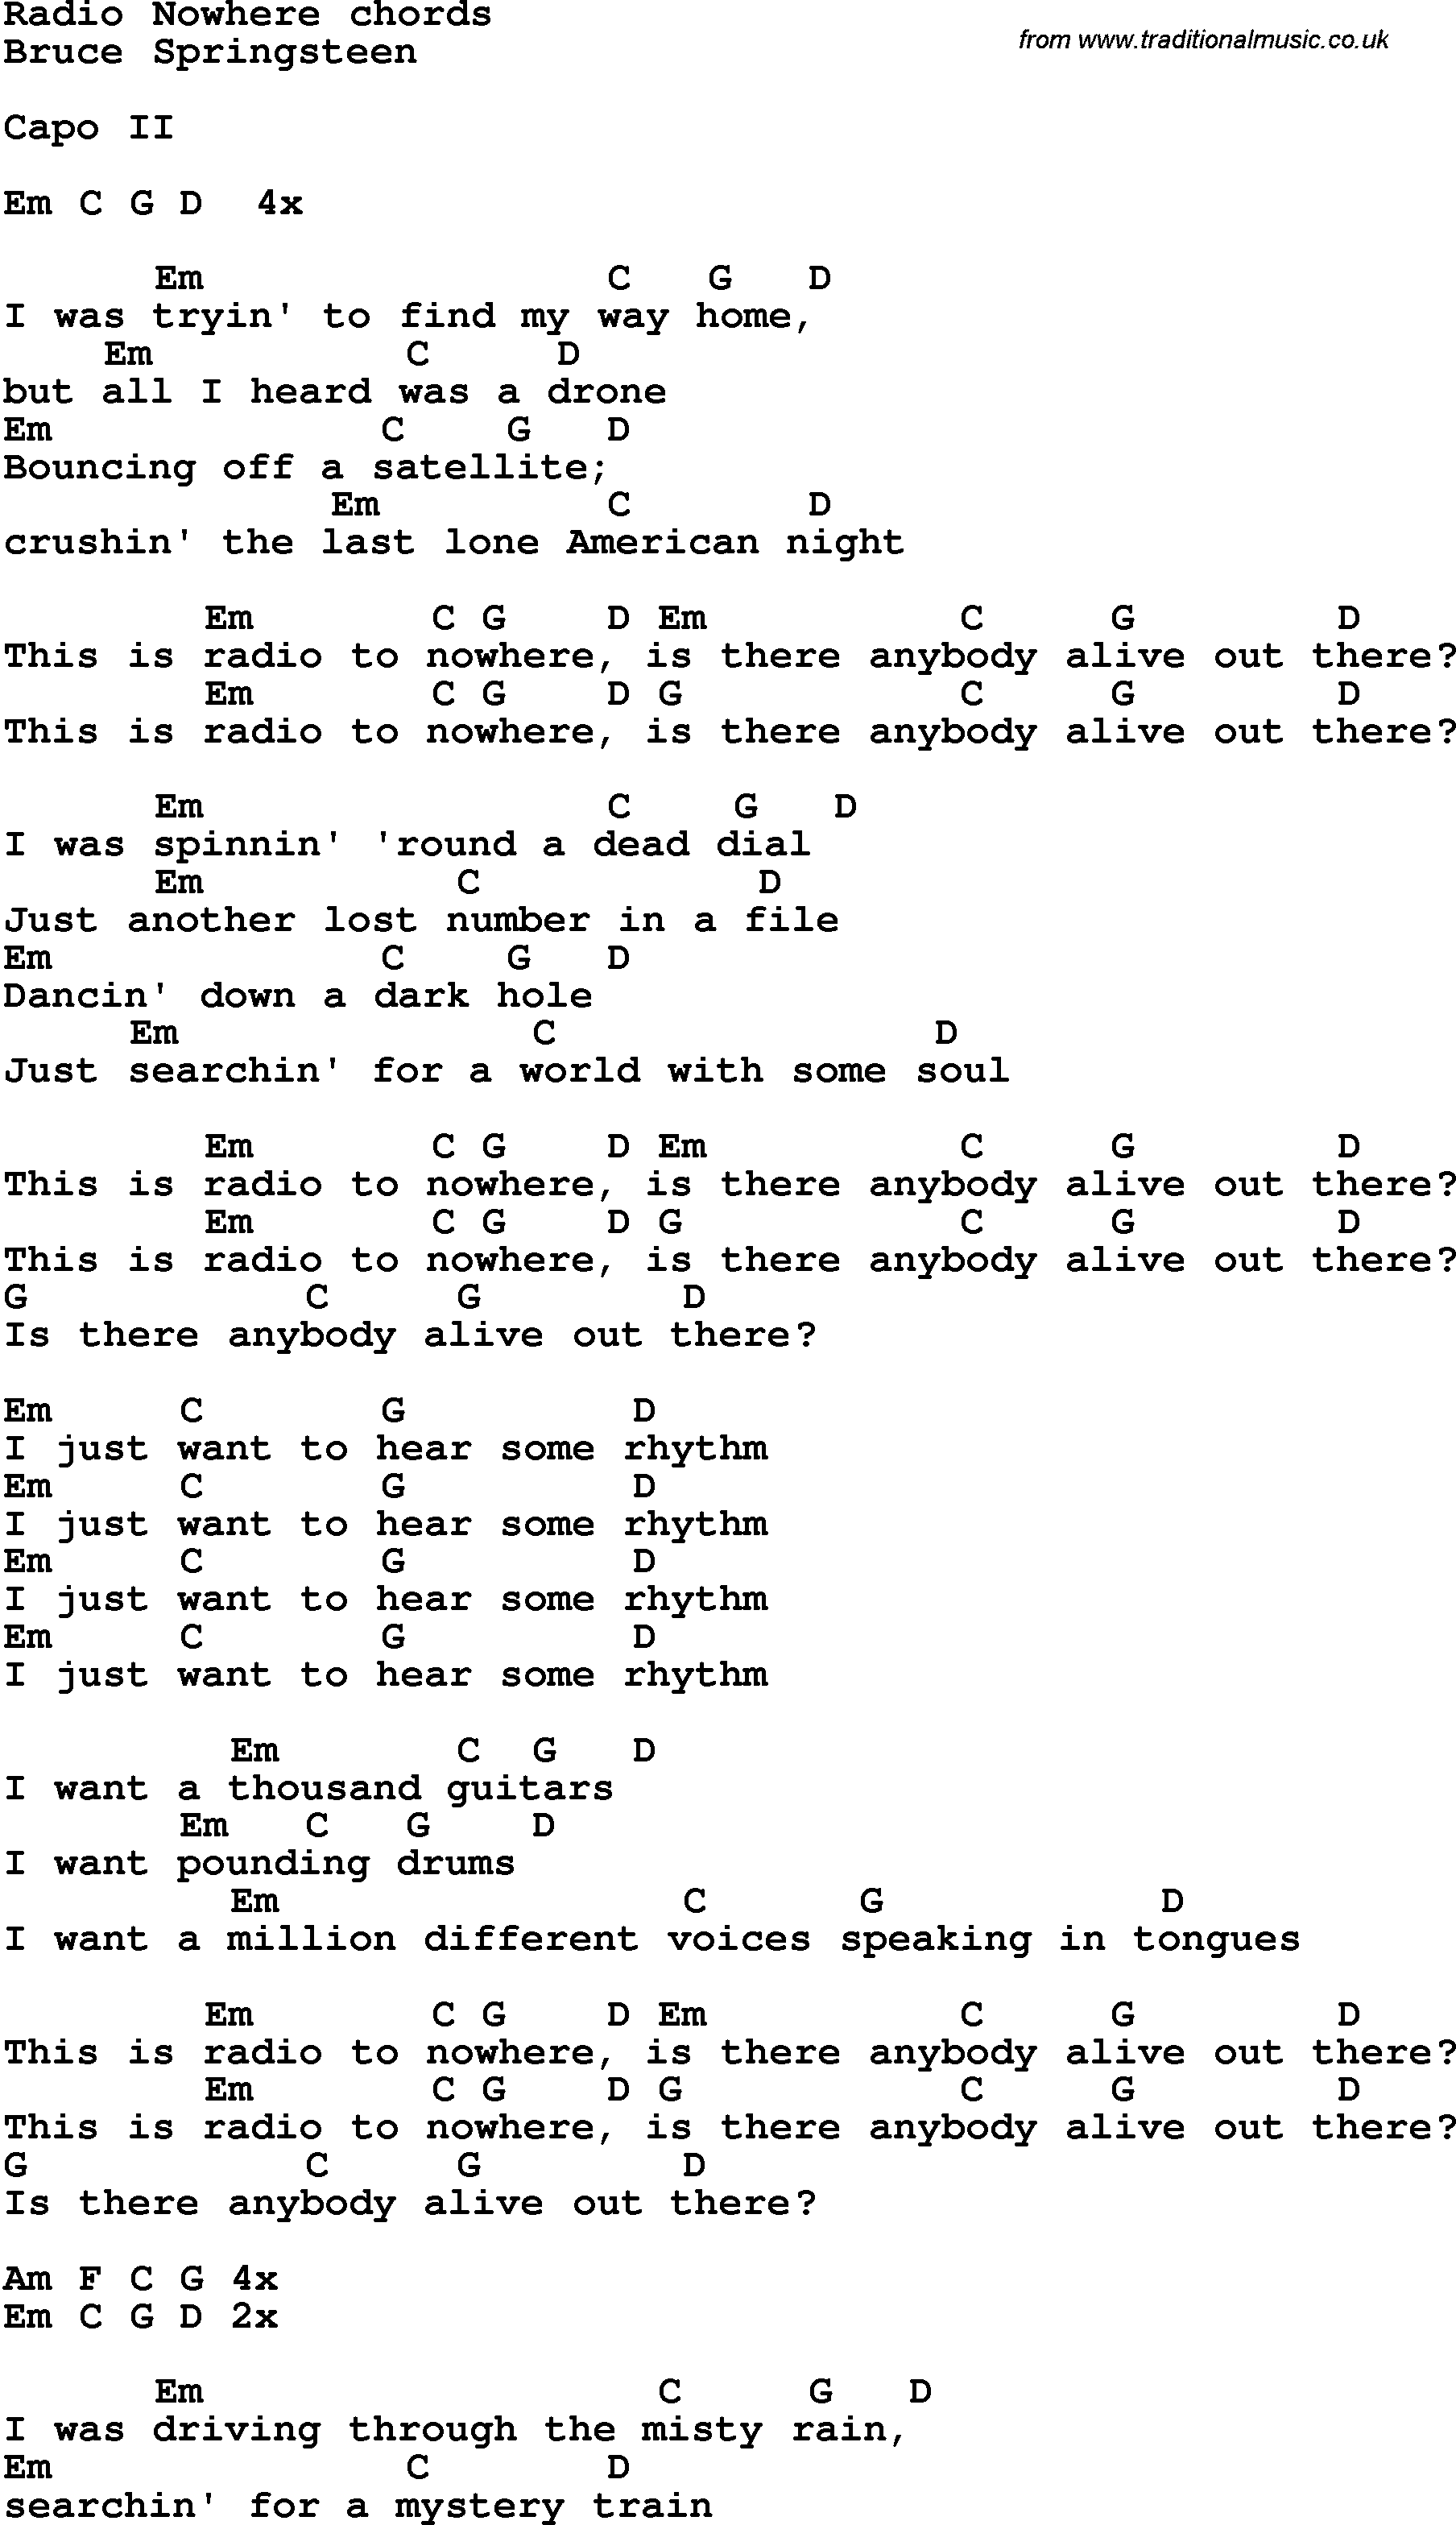 Song Lyrics with guitar chords for Radio Nowhere